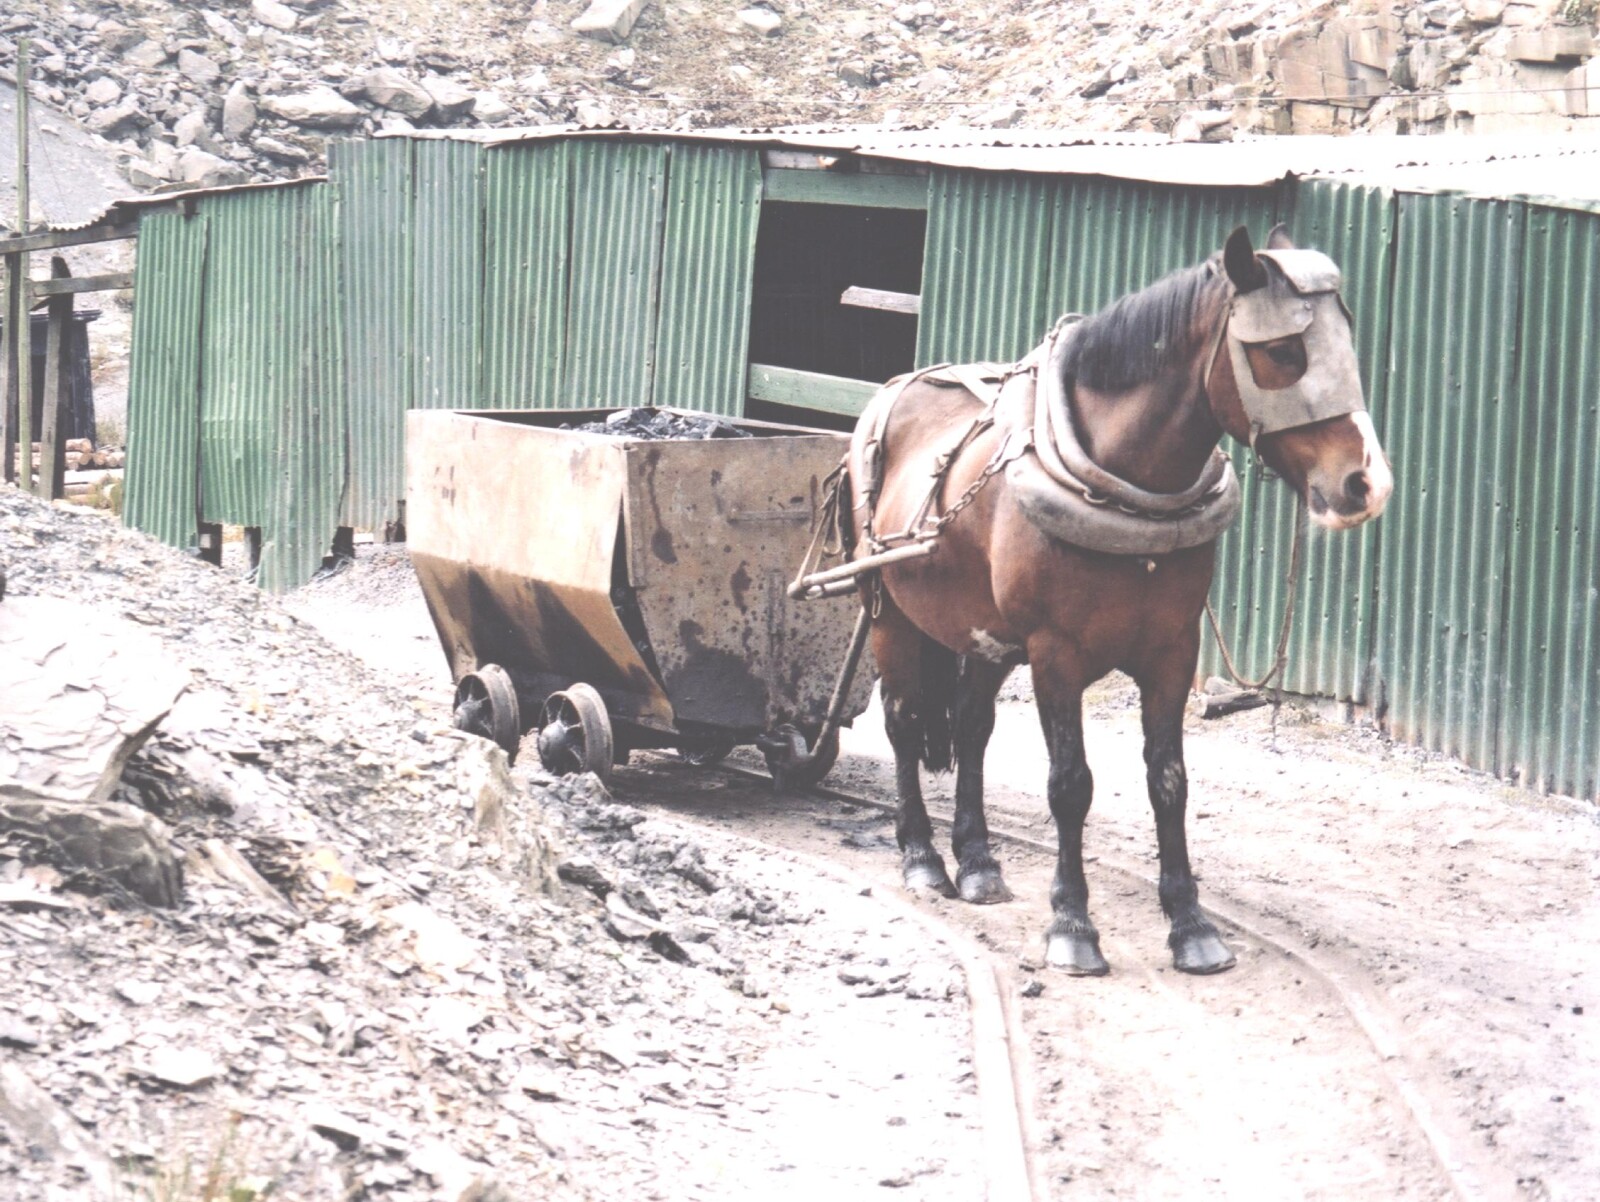 A brown horse stands on a track; he has a mask covering his face and is pulling a cart behind him and there's a green shed to one side